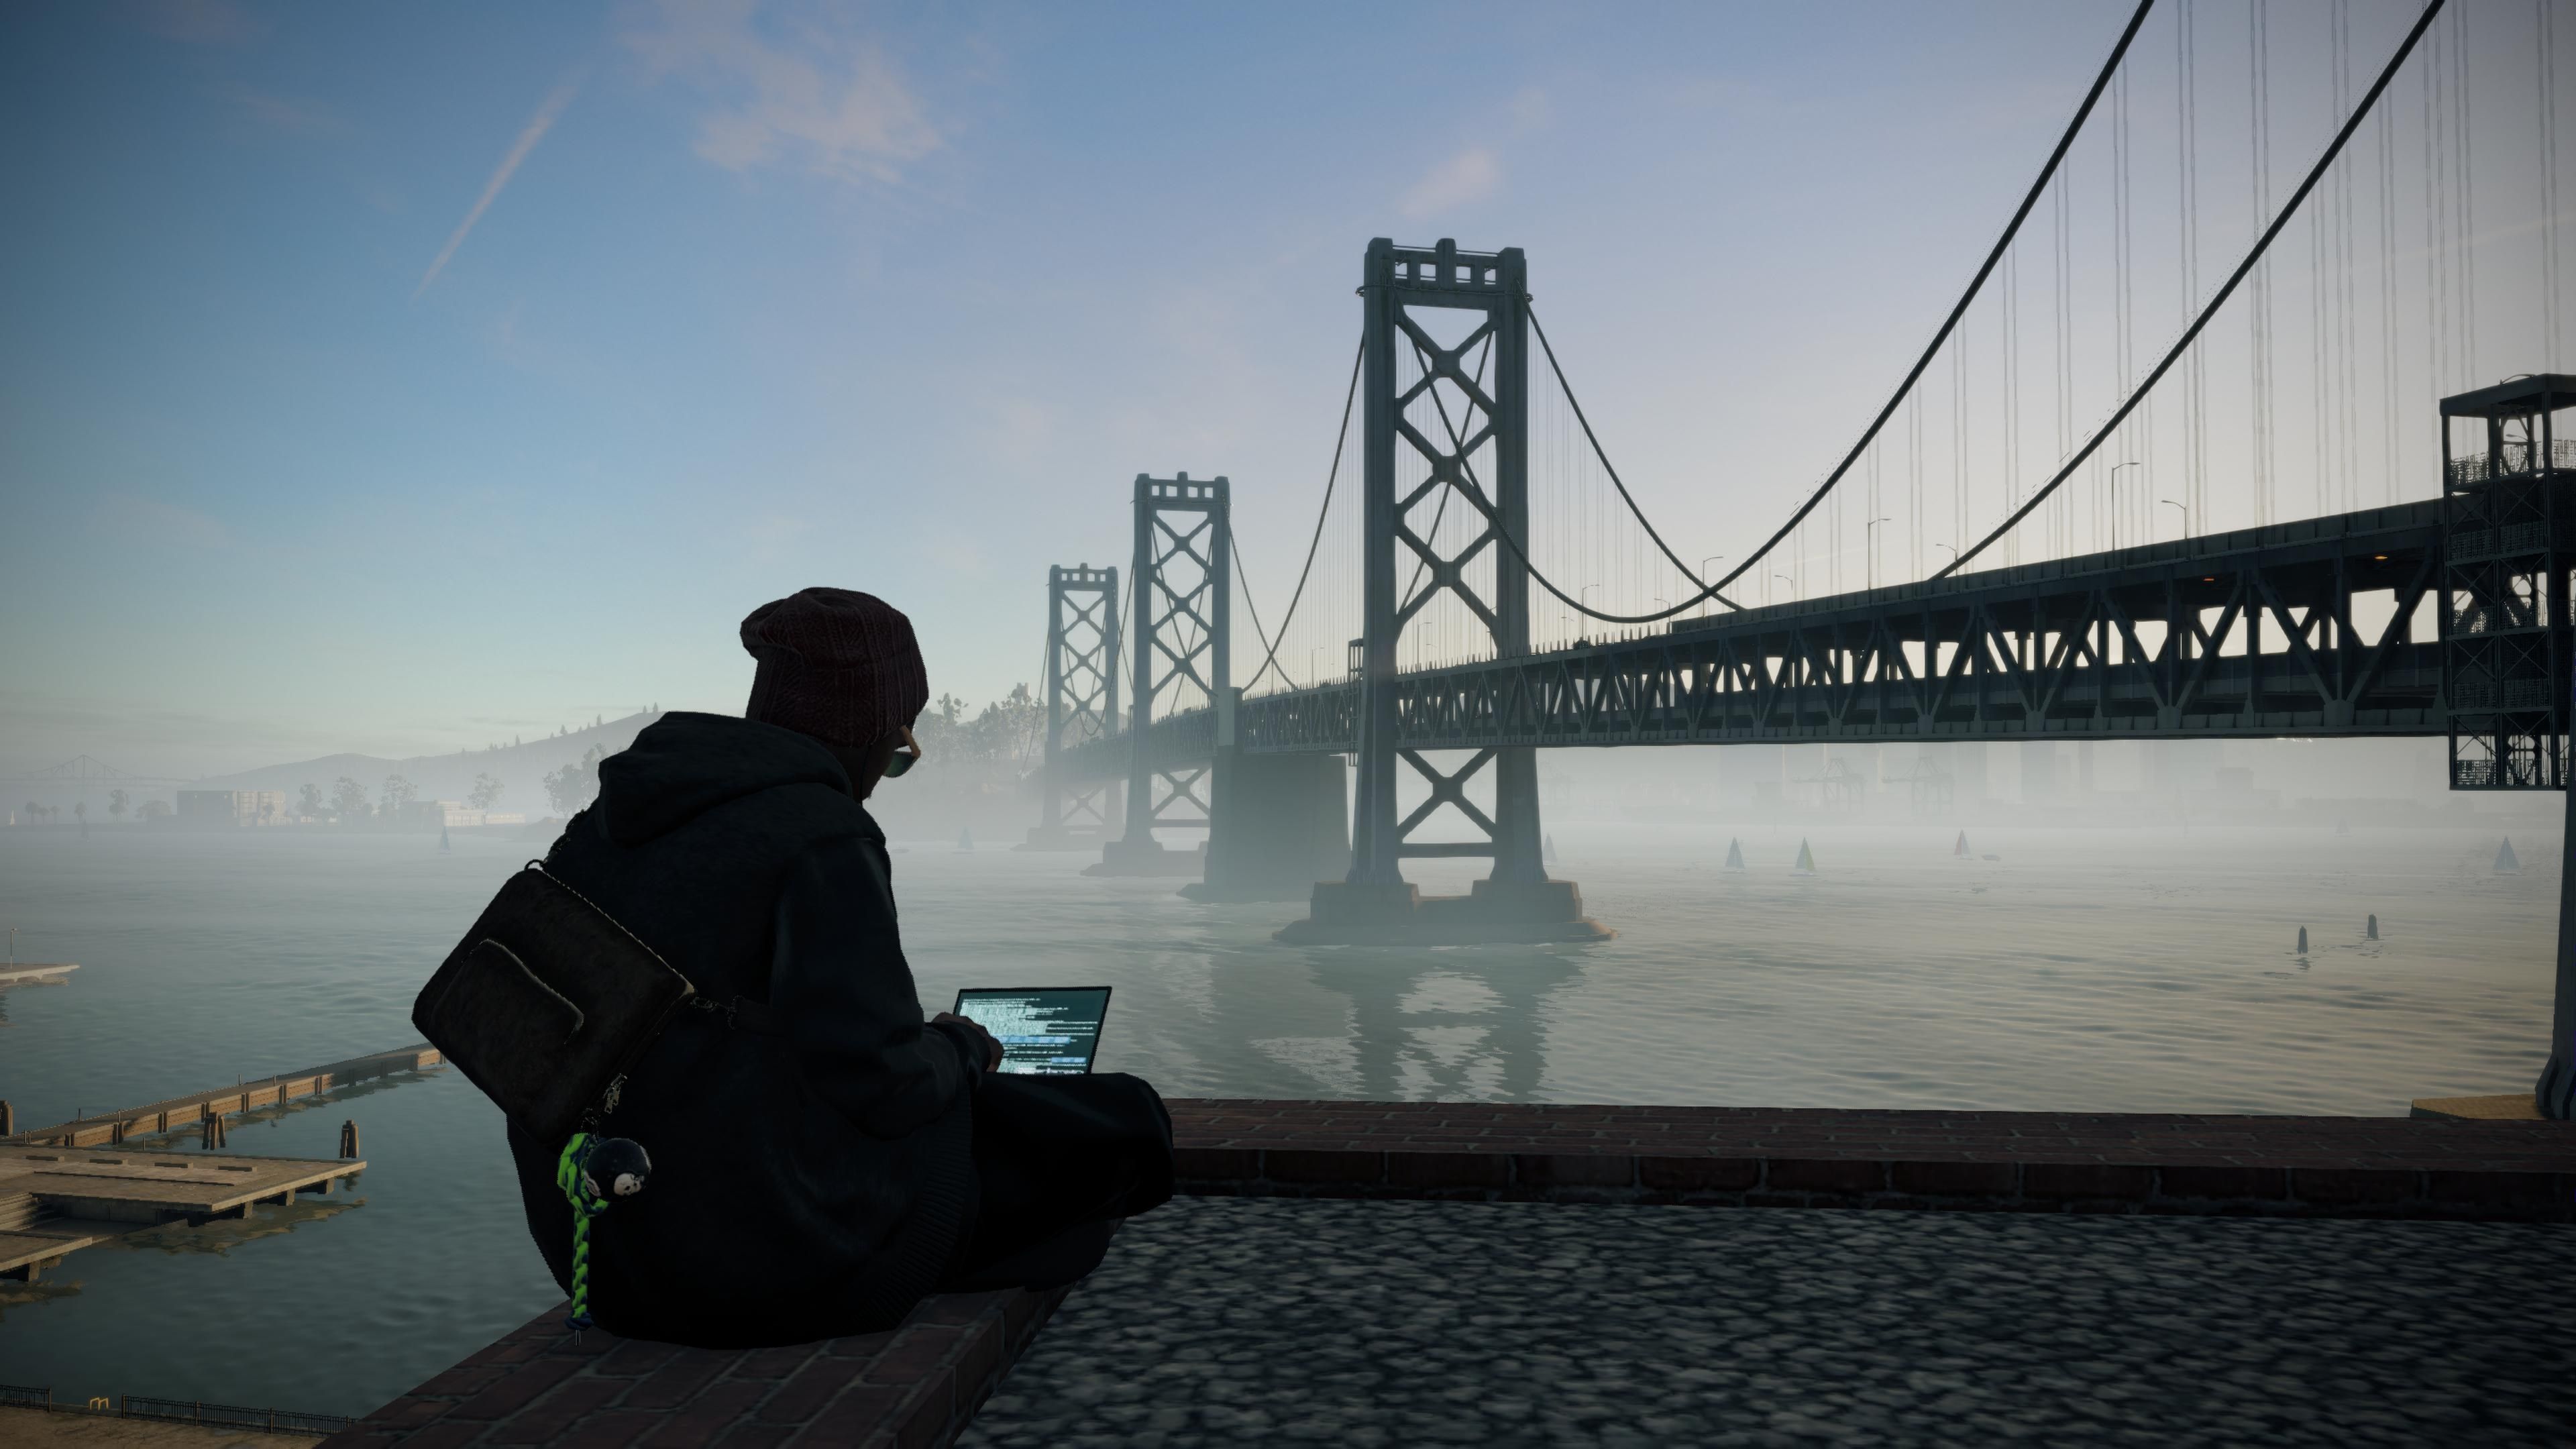 3840x2160 watch dogs 2 4k HD wallpaper for free download